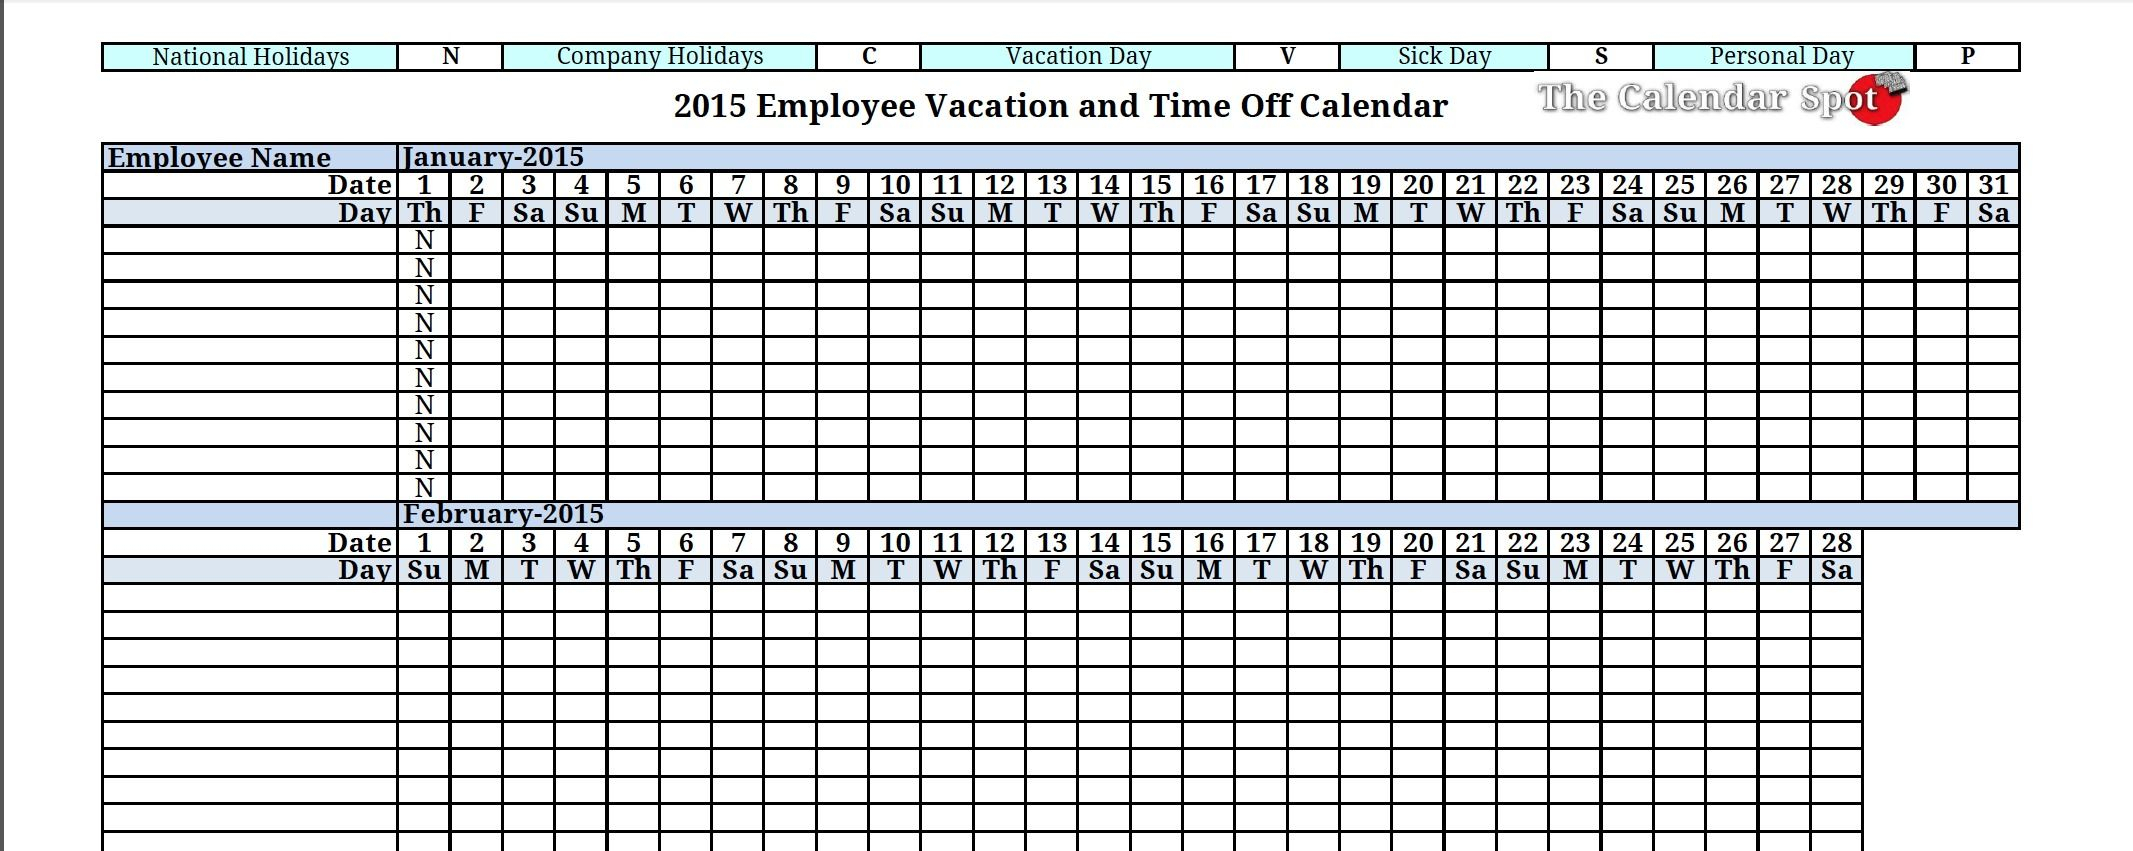 2015 Employee Vacation Absence Tracking Calendar | Vacation